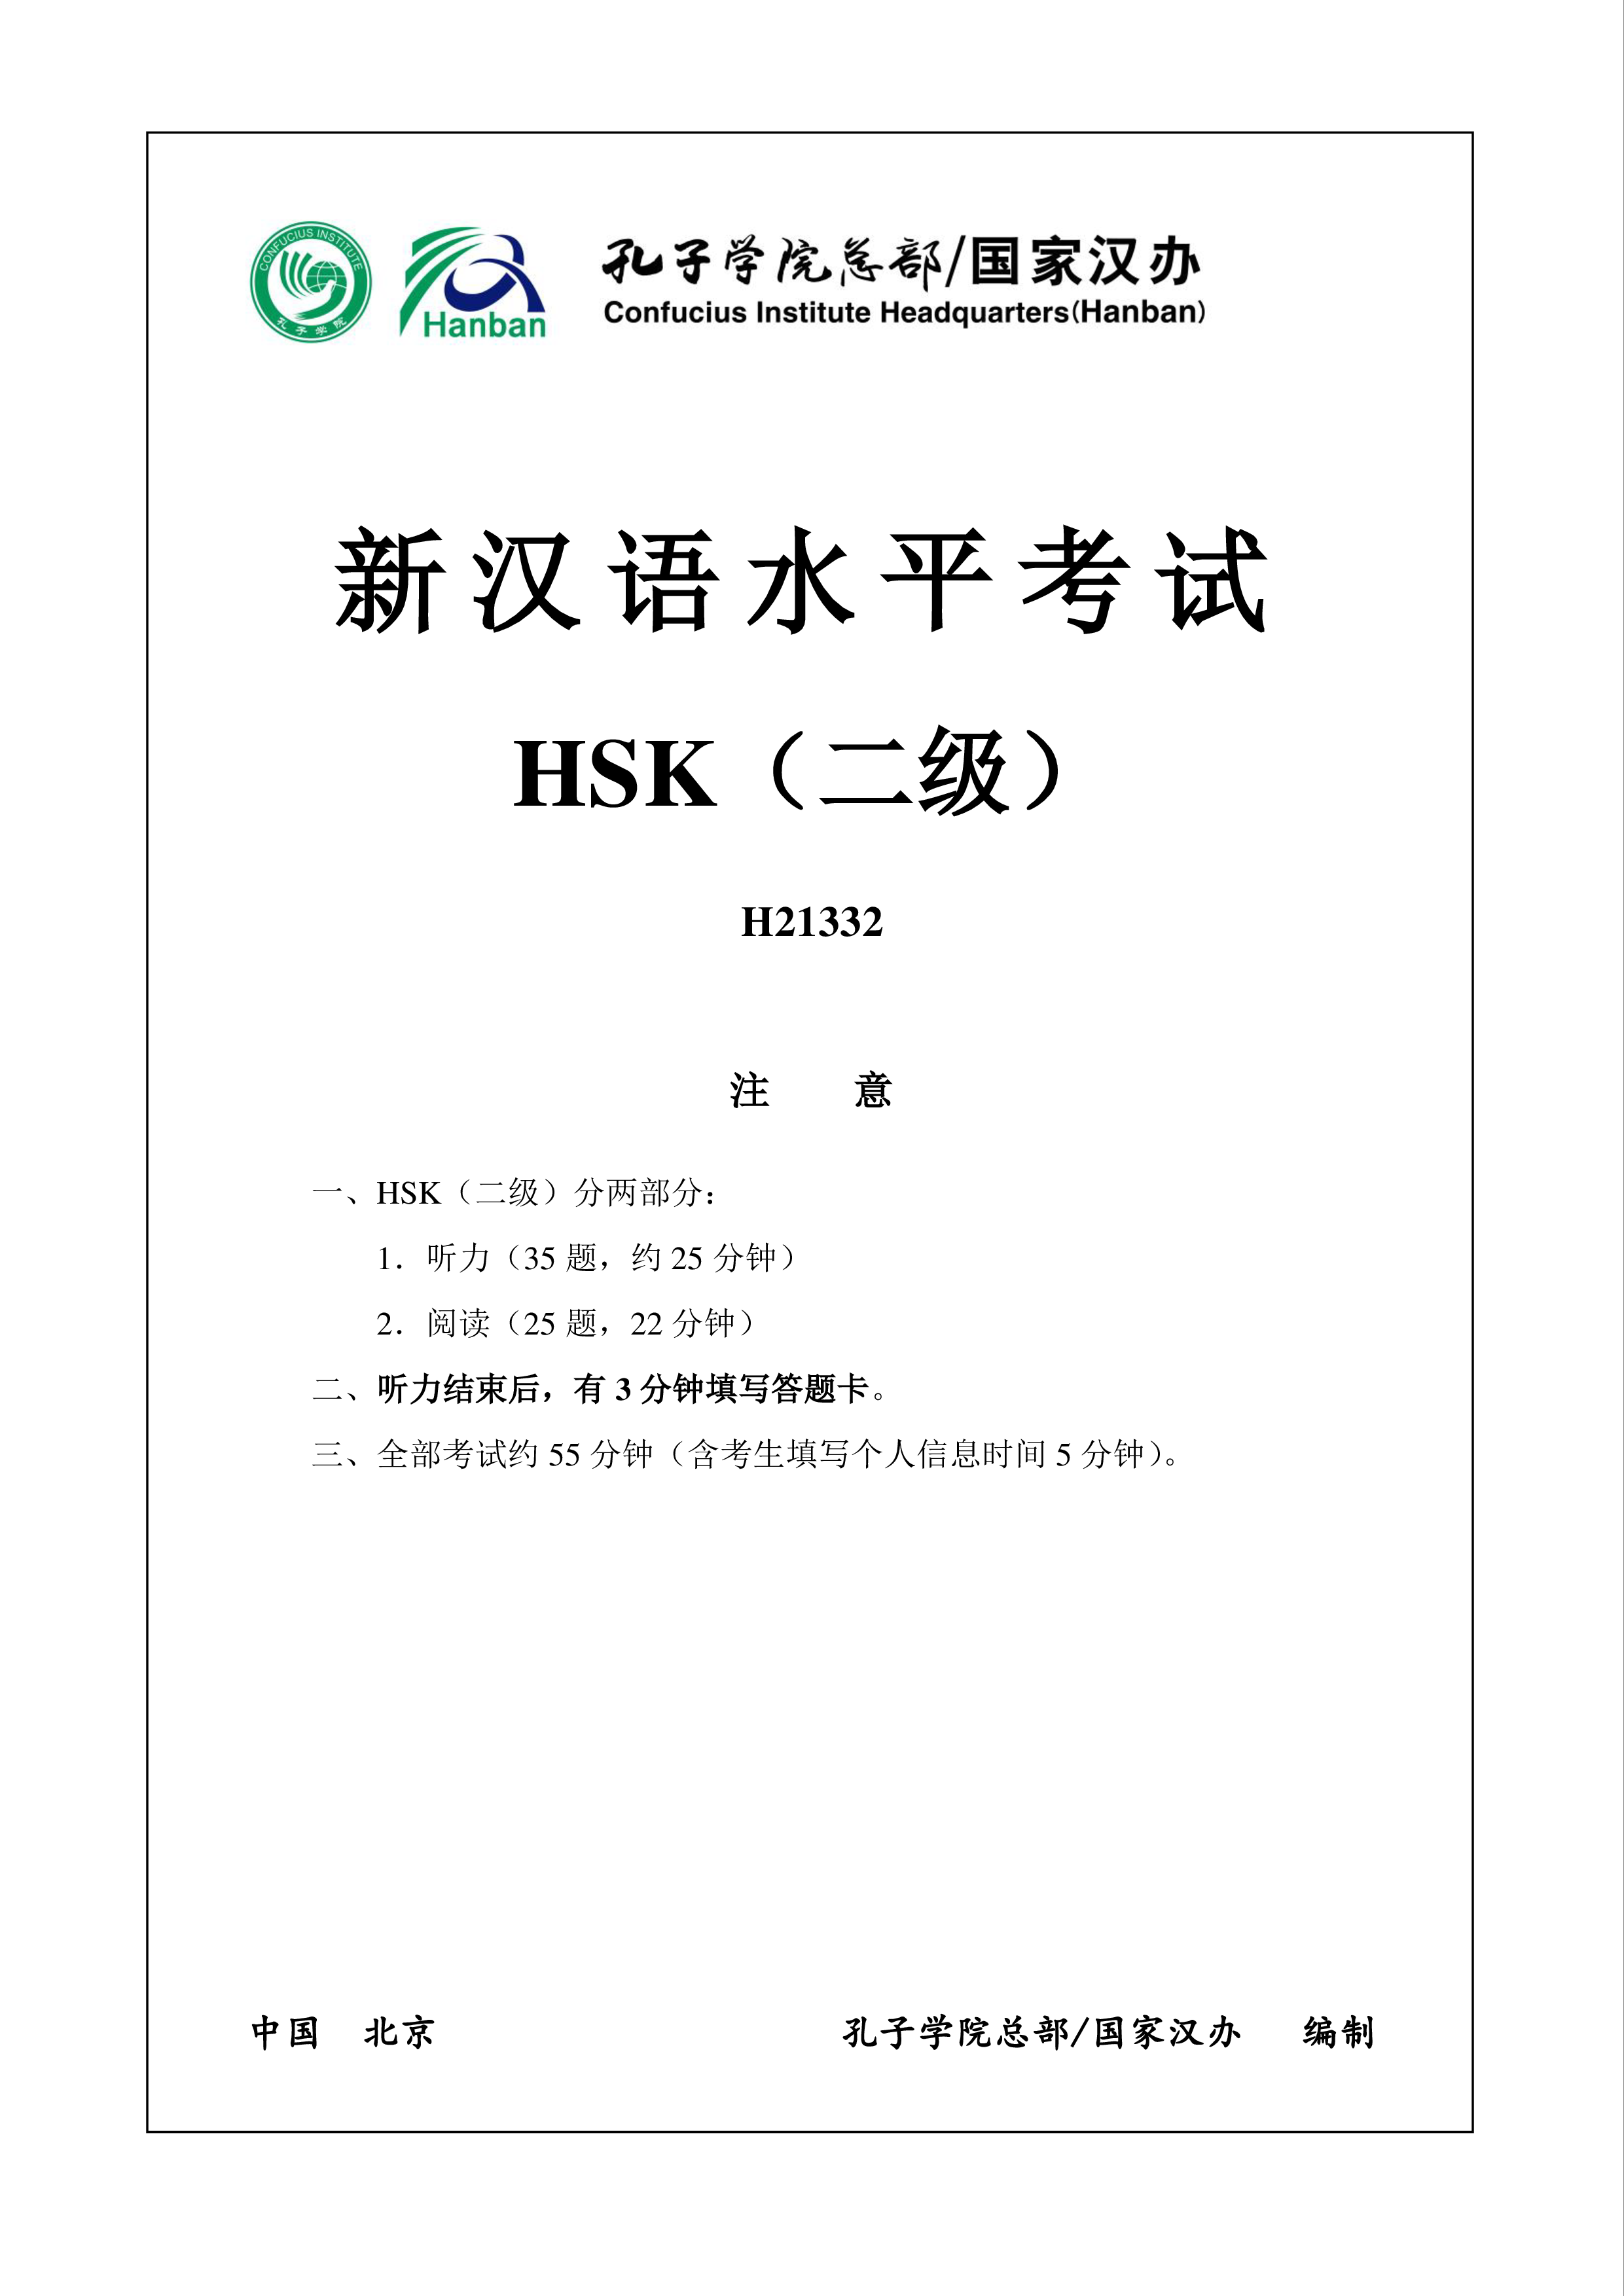 hsk2 chinese exam including answers # hsk2 h21332 template